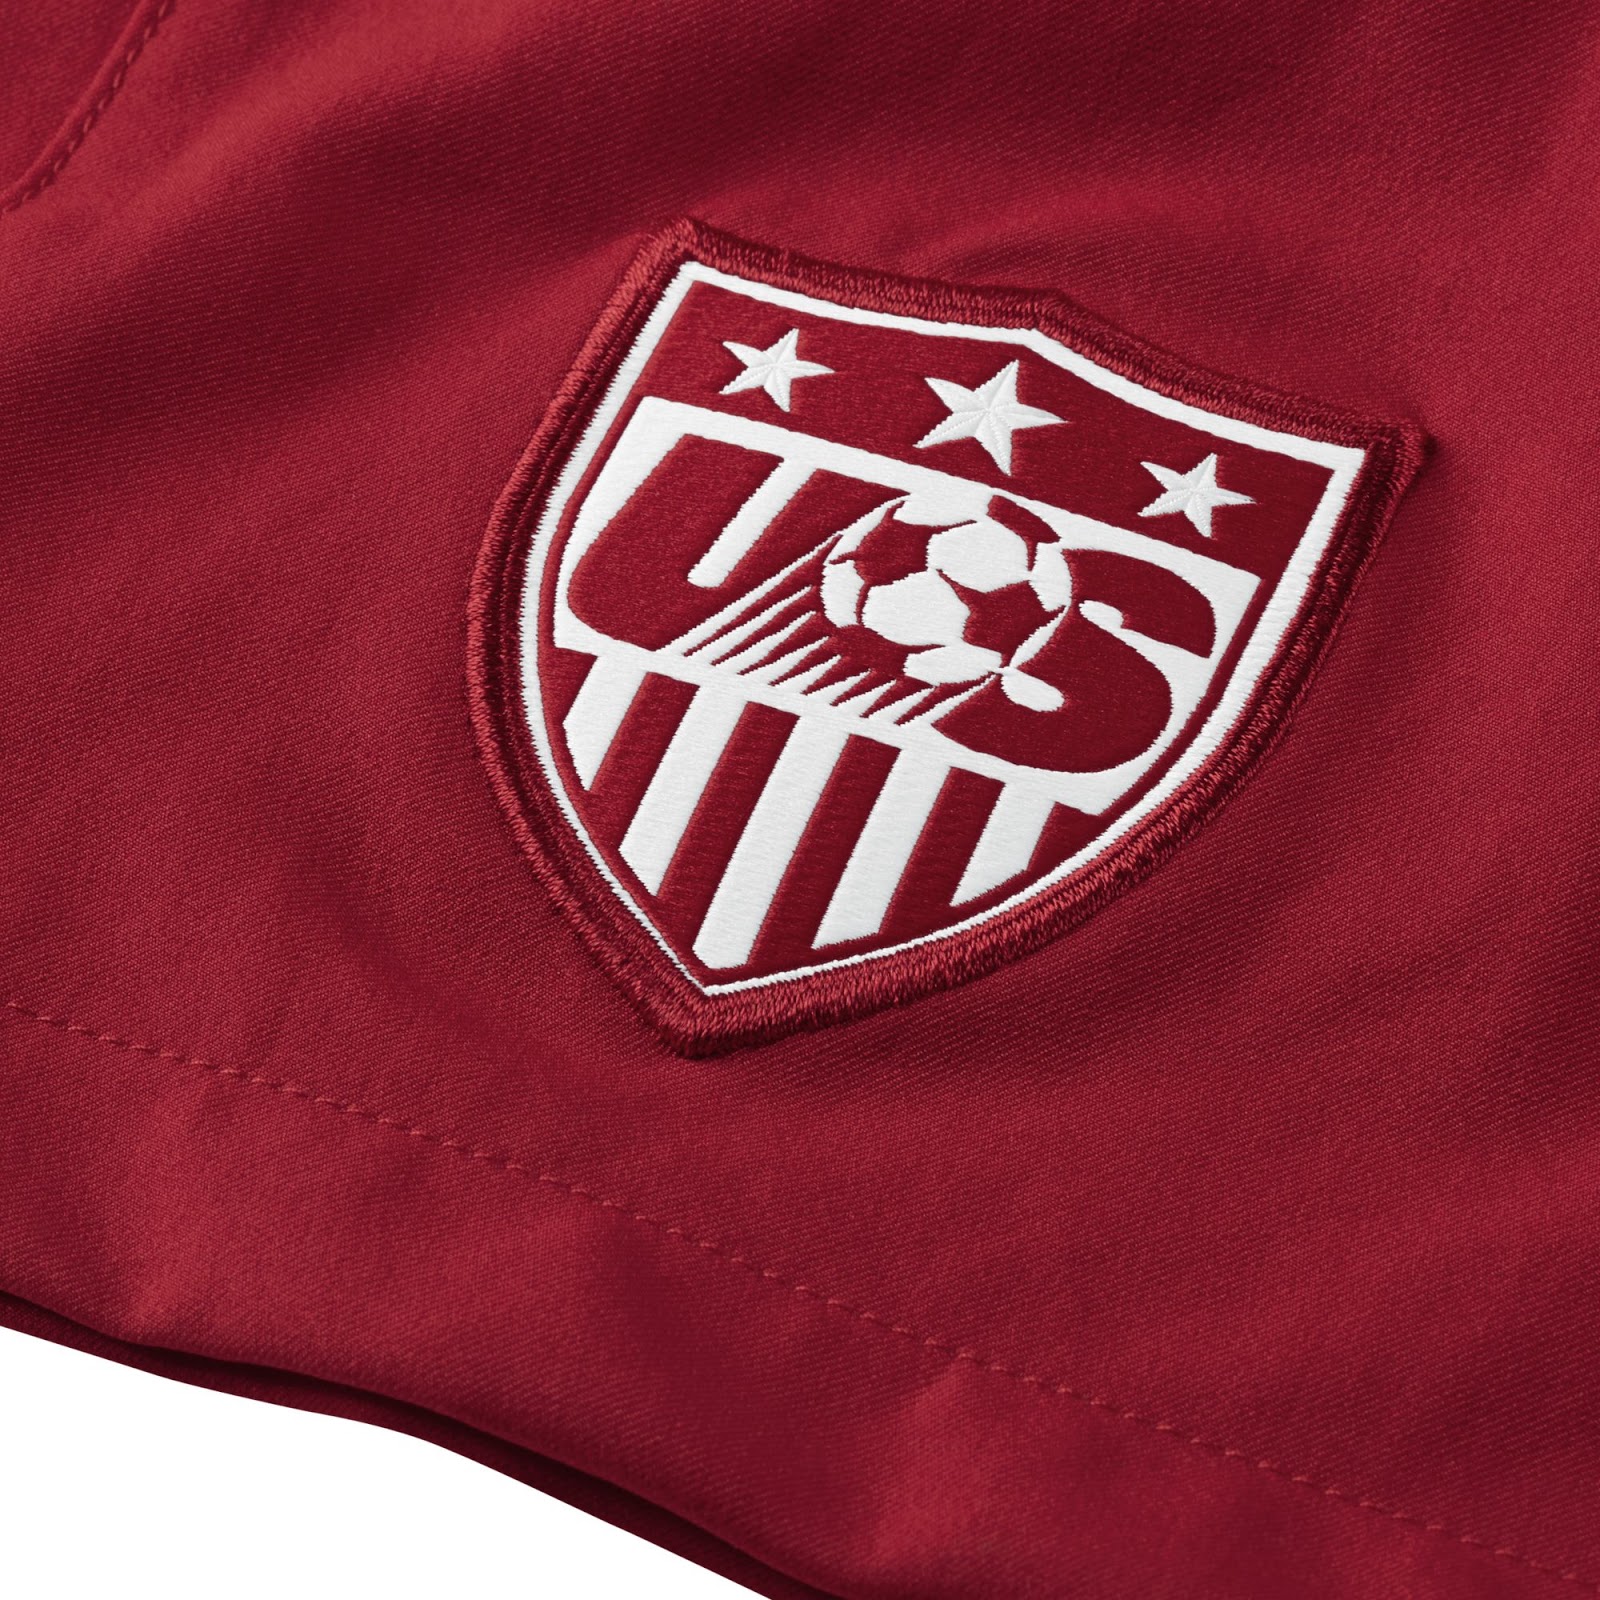 USA 2014 World Cup Home and Away Kits Released - Footy Headlines